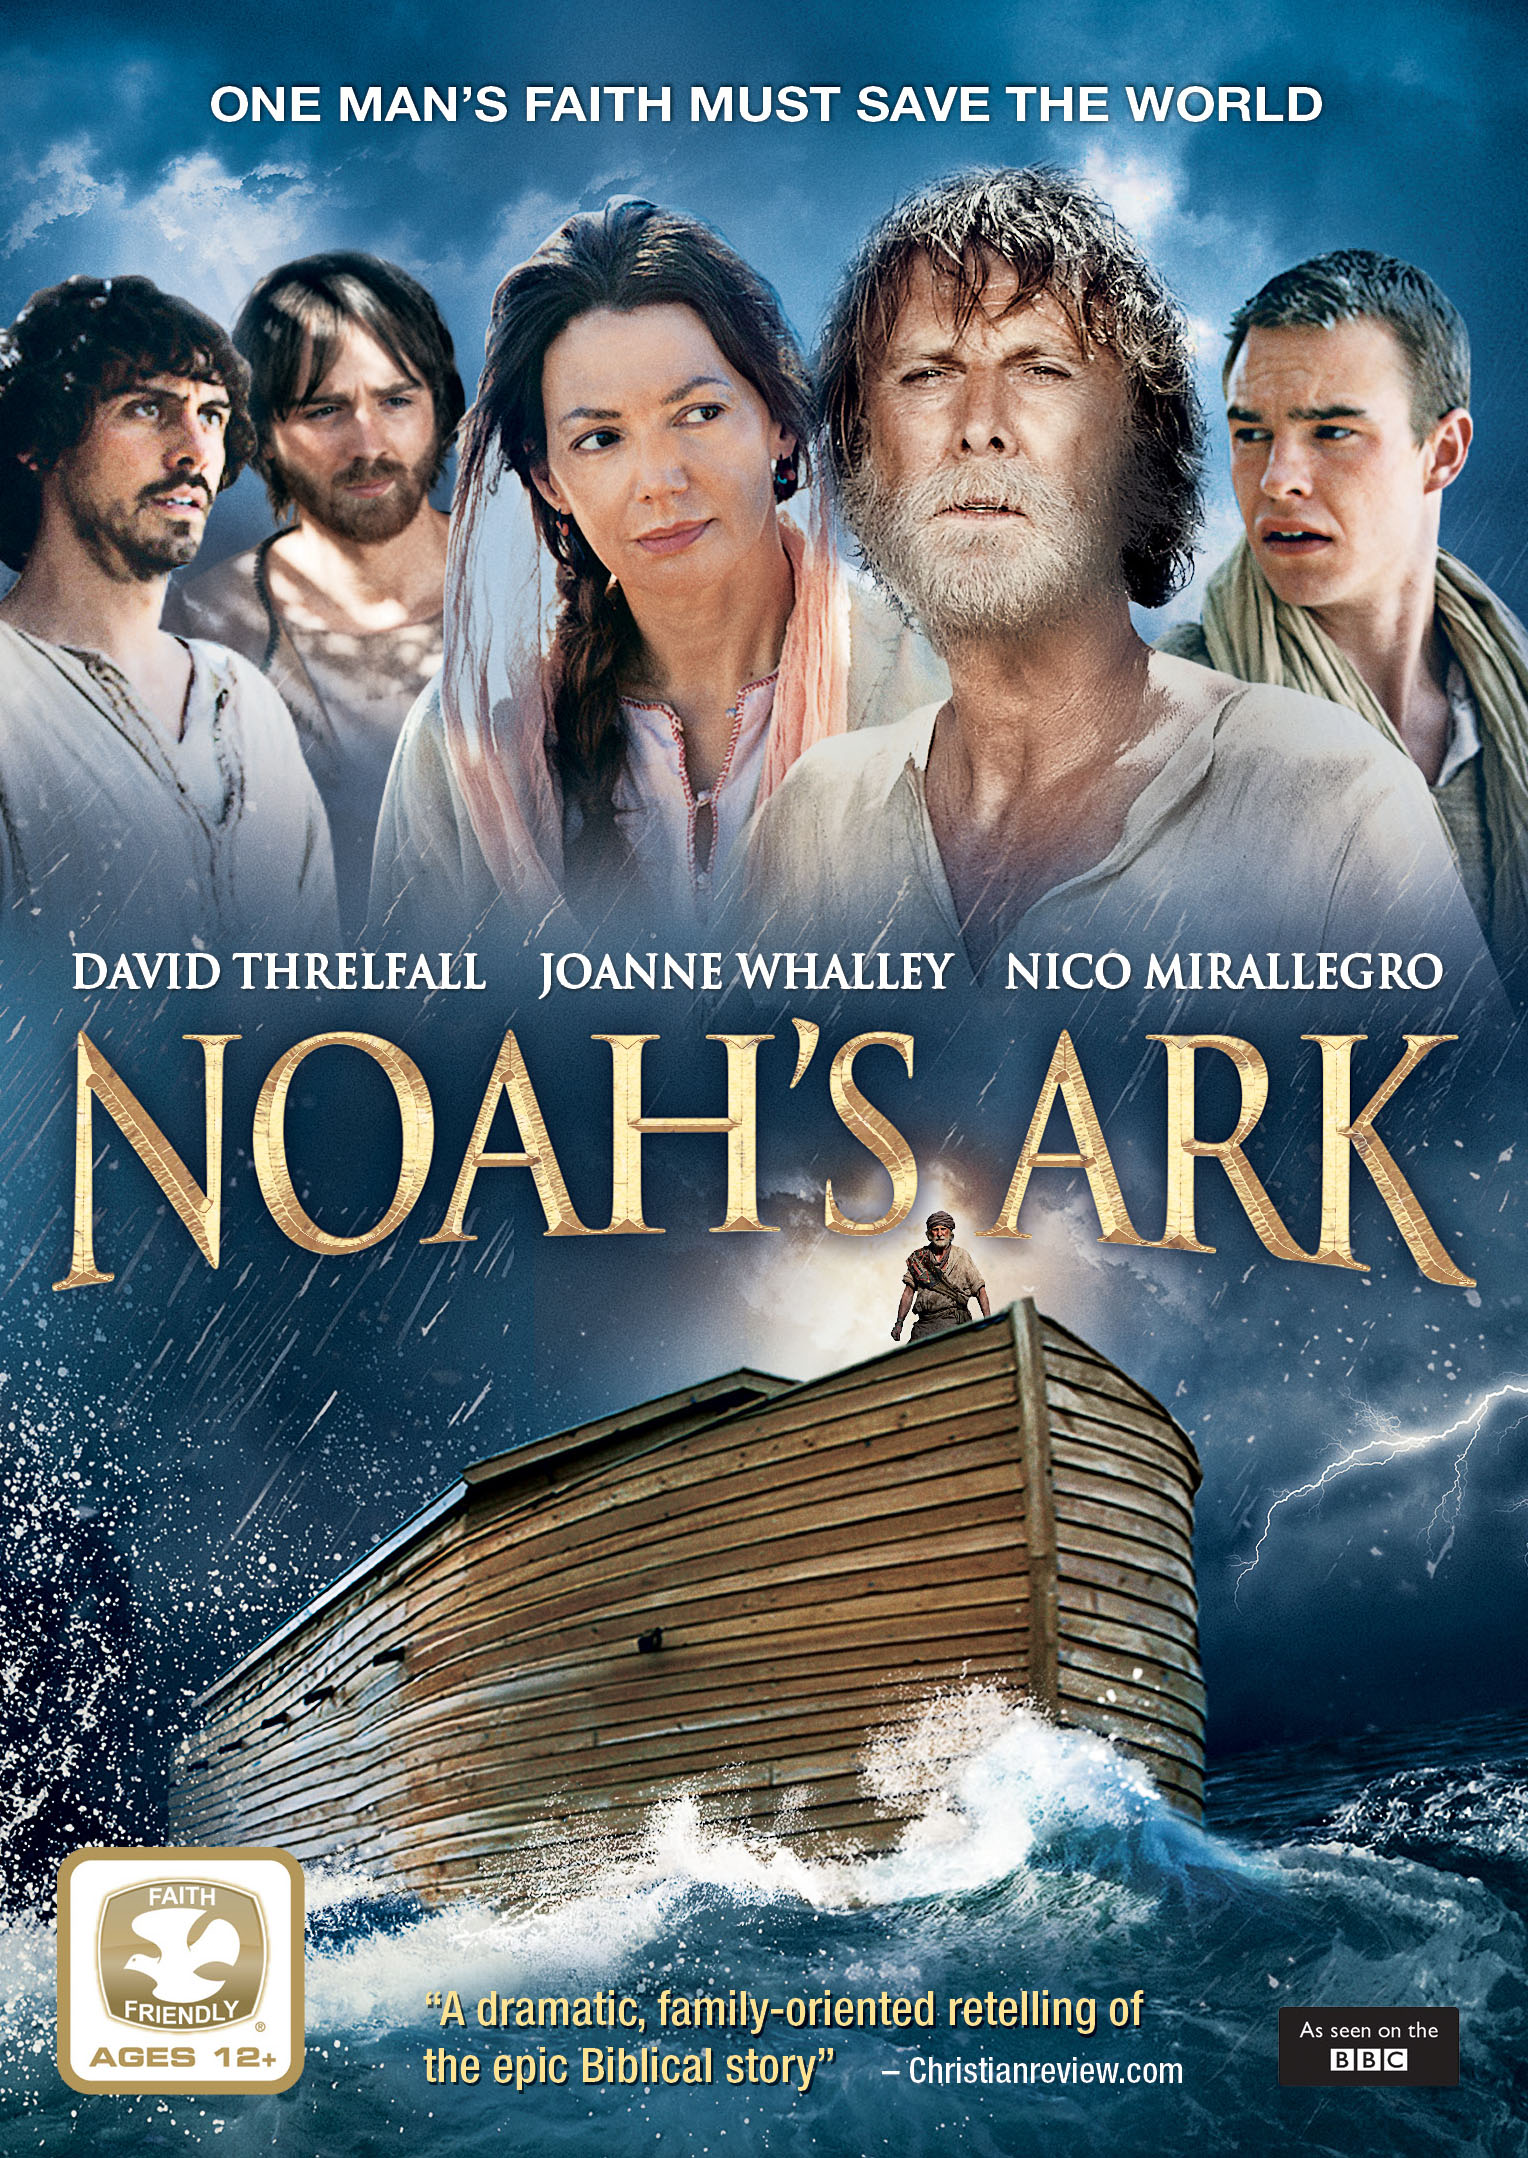 The BBC’s Noah’s Ark is coming to DVD in North America | Peter T. Chattaway